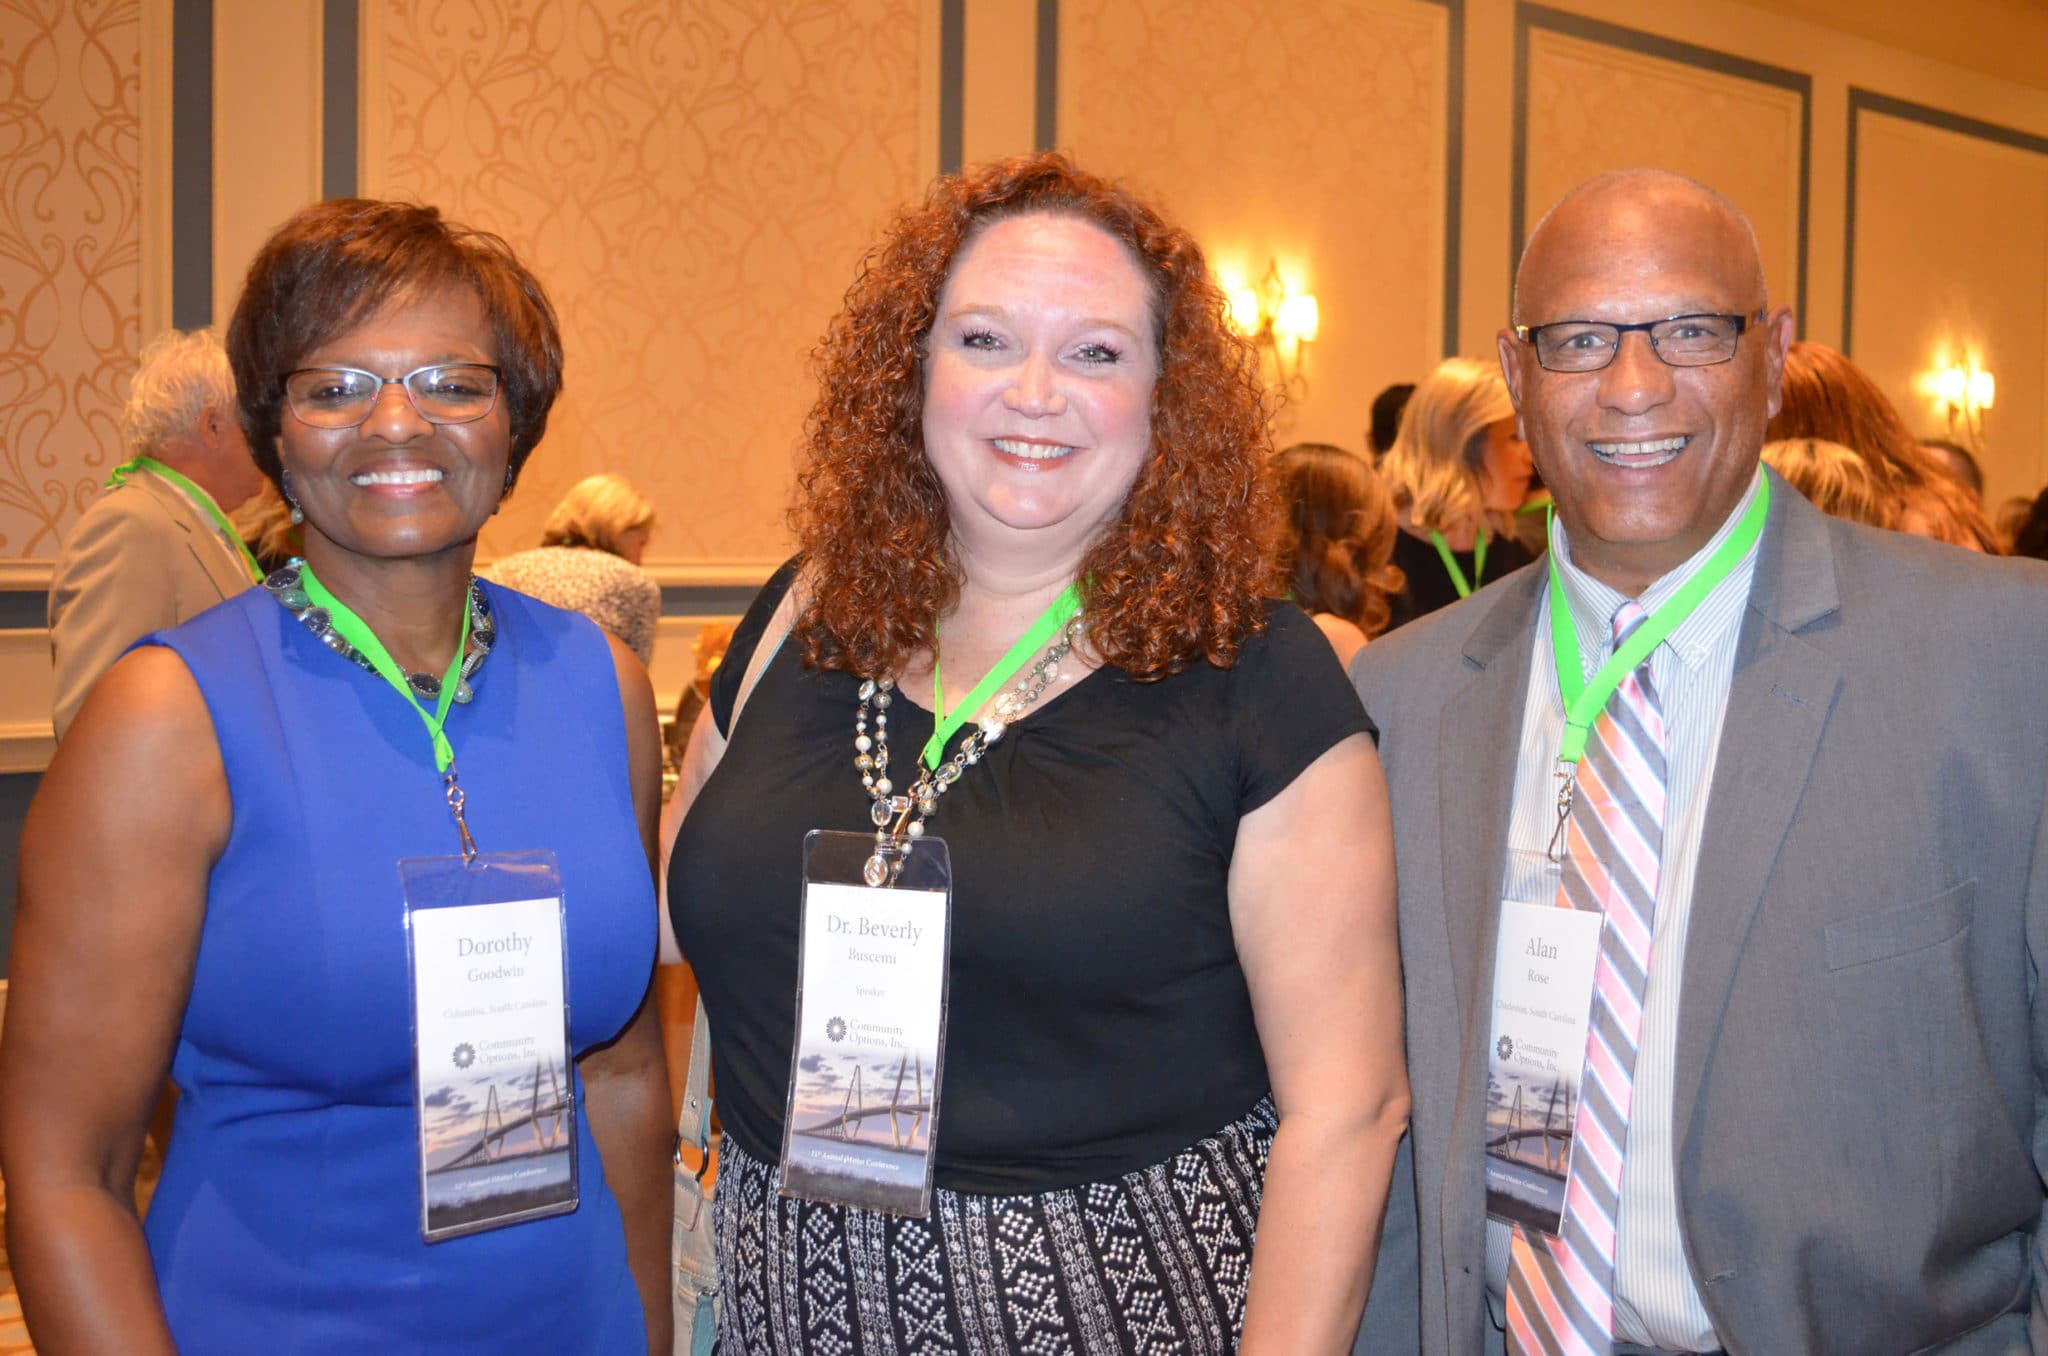 On September 24-27, 2017 Community Options hosted its 11th Annual iMatter Conference A Meaningful Life: Conference on Supported Employment at the Francis Marion Hotel in Charleston, SC. The Welcome Reception was Sunday, September 24th @ 6:00 pm at Francis Marion Hotel - Carolina A Ballroom (Mezzanine Level).